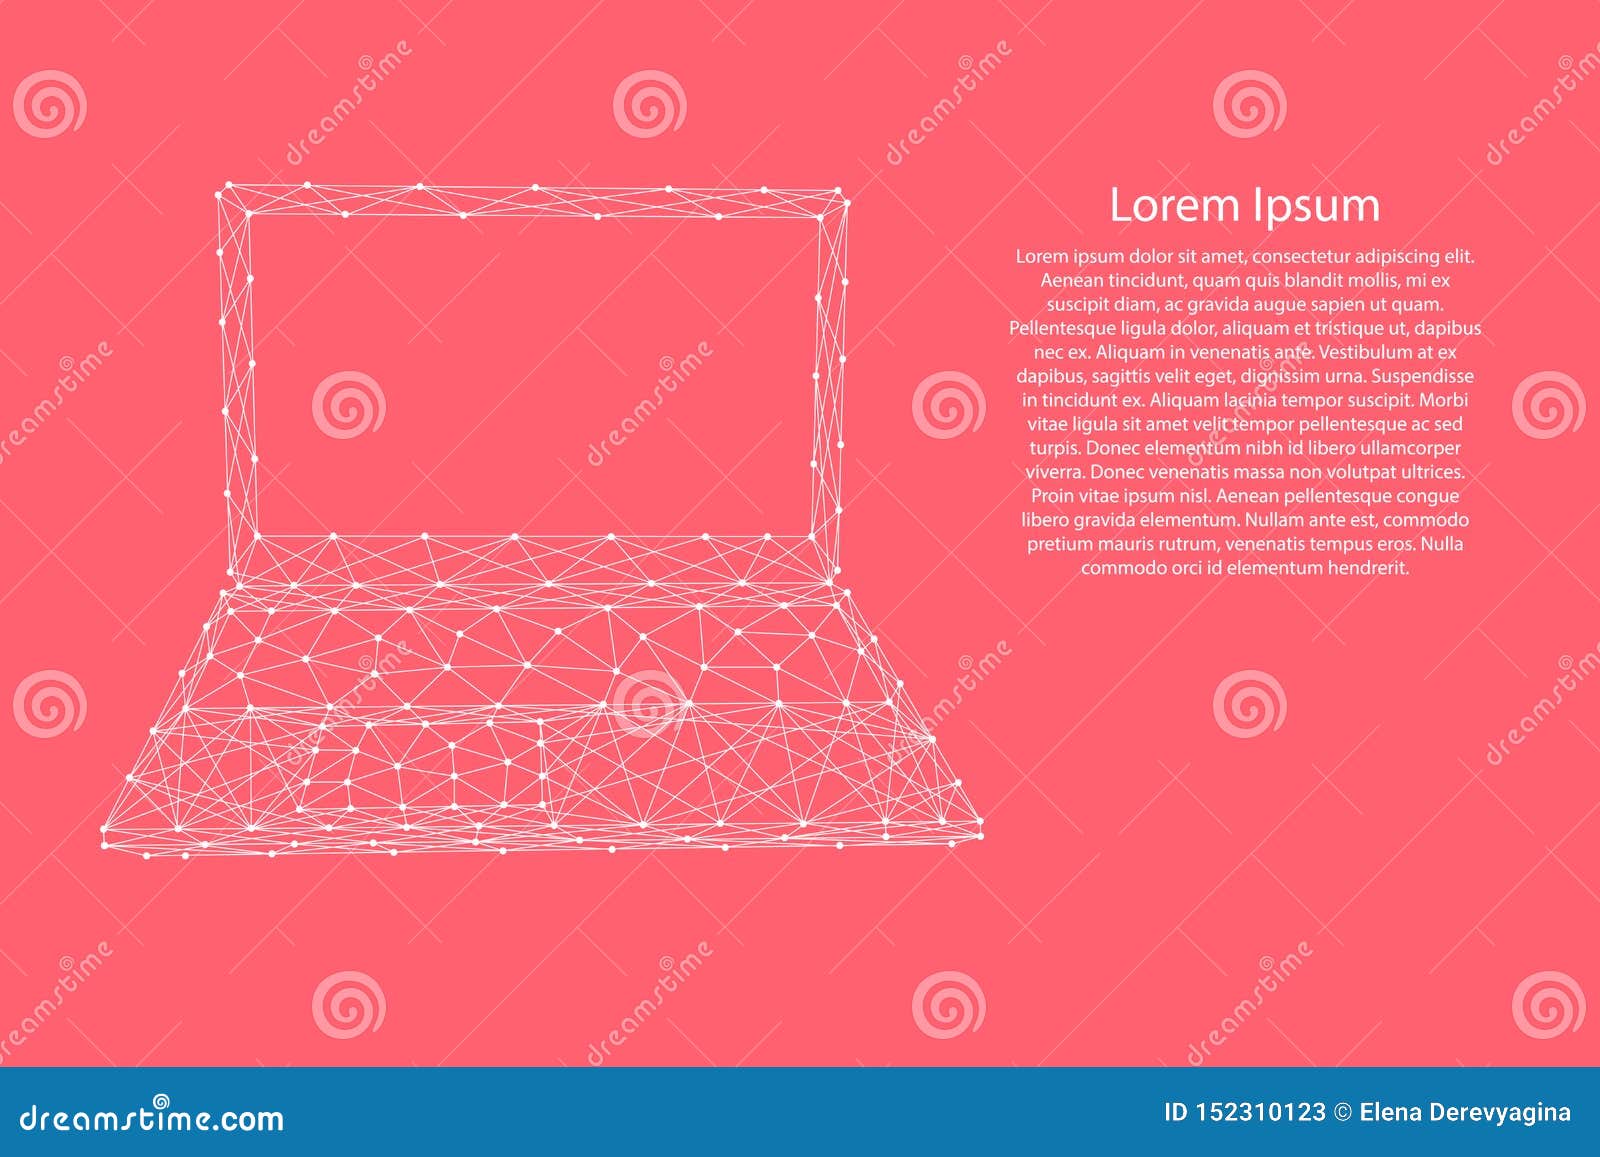 laptop open notebook portable from abstract futuristic polygonal white lines and dots on pink rose color coral background for